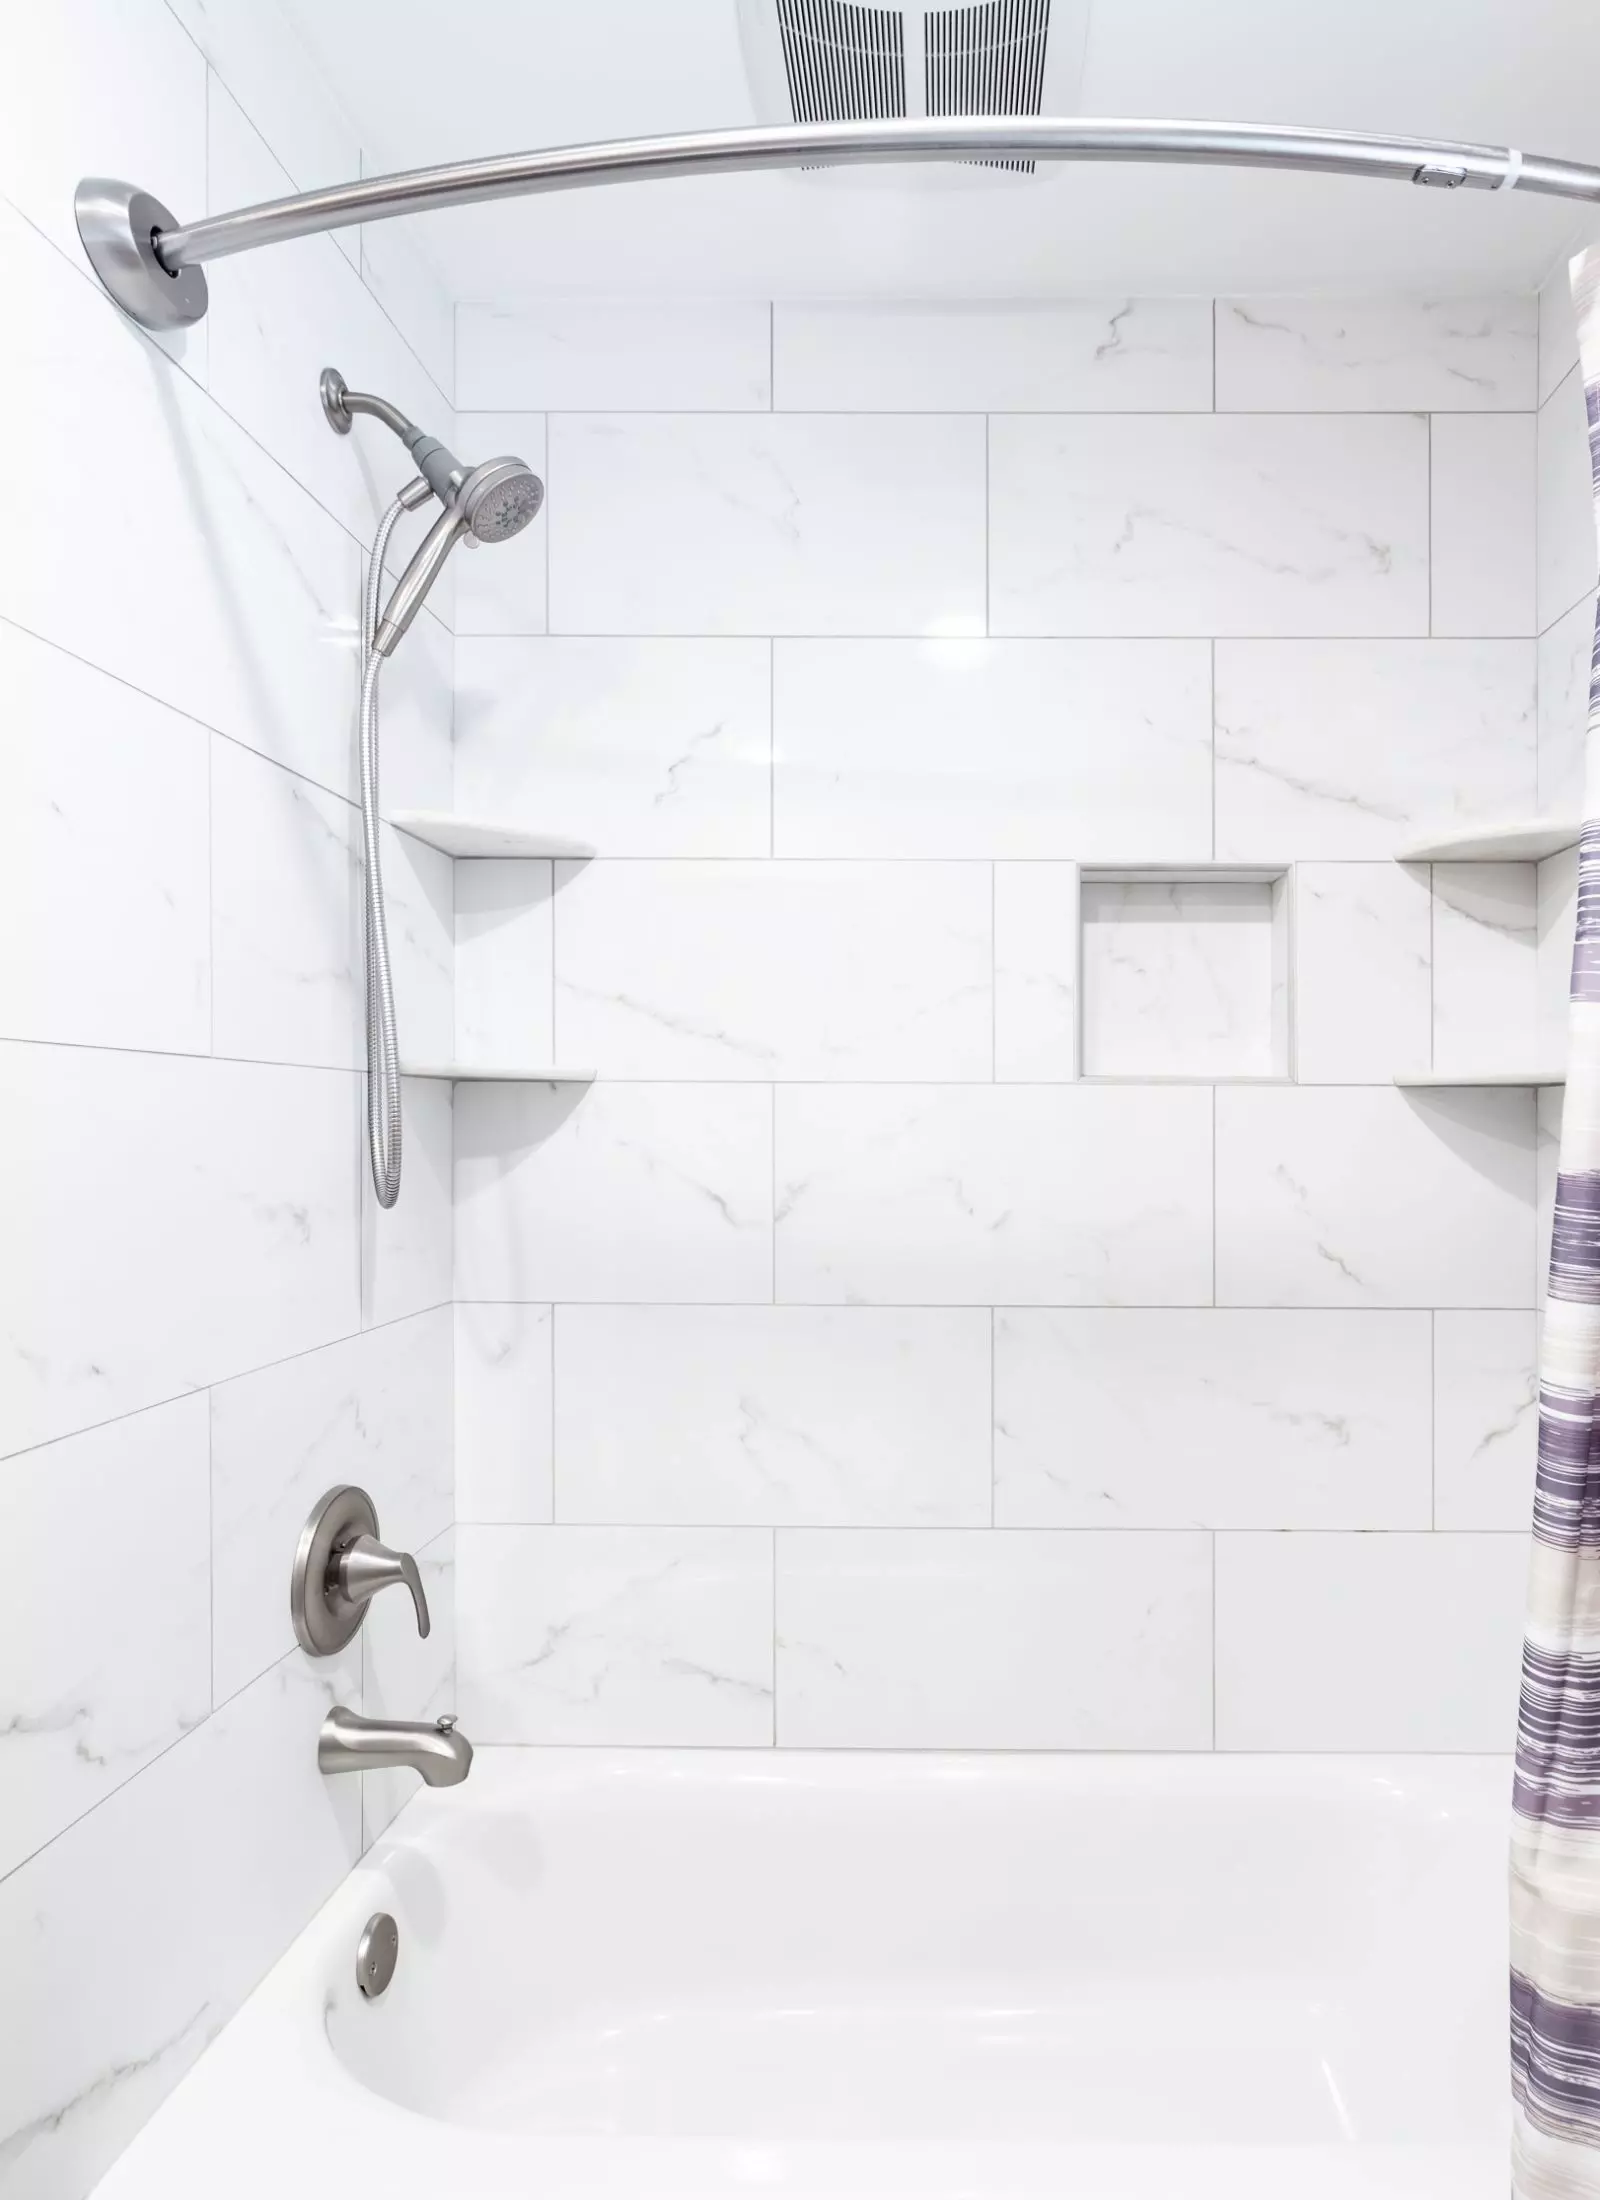 A bathroom remodel with a purple shower curtain.